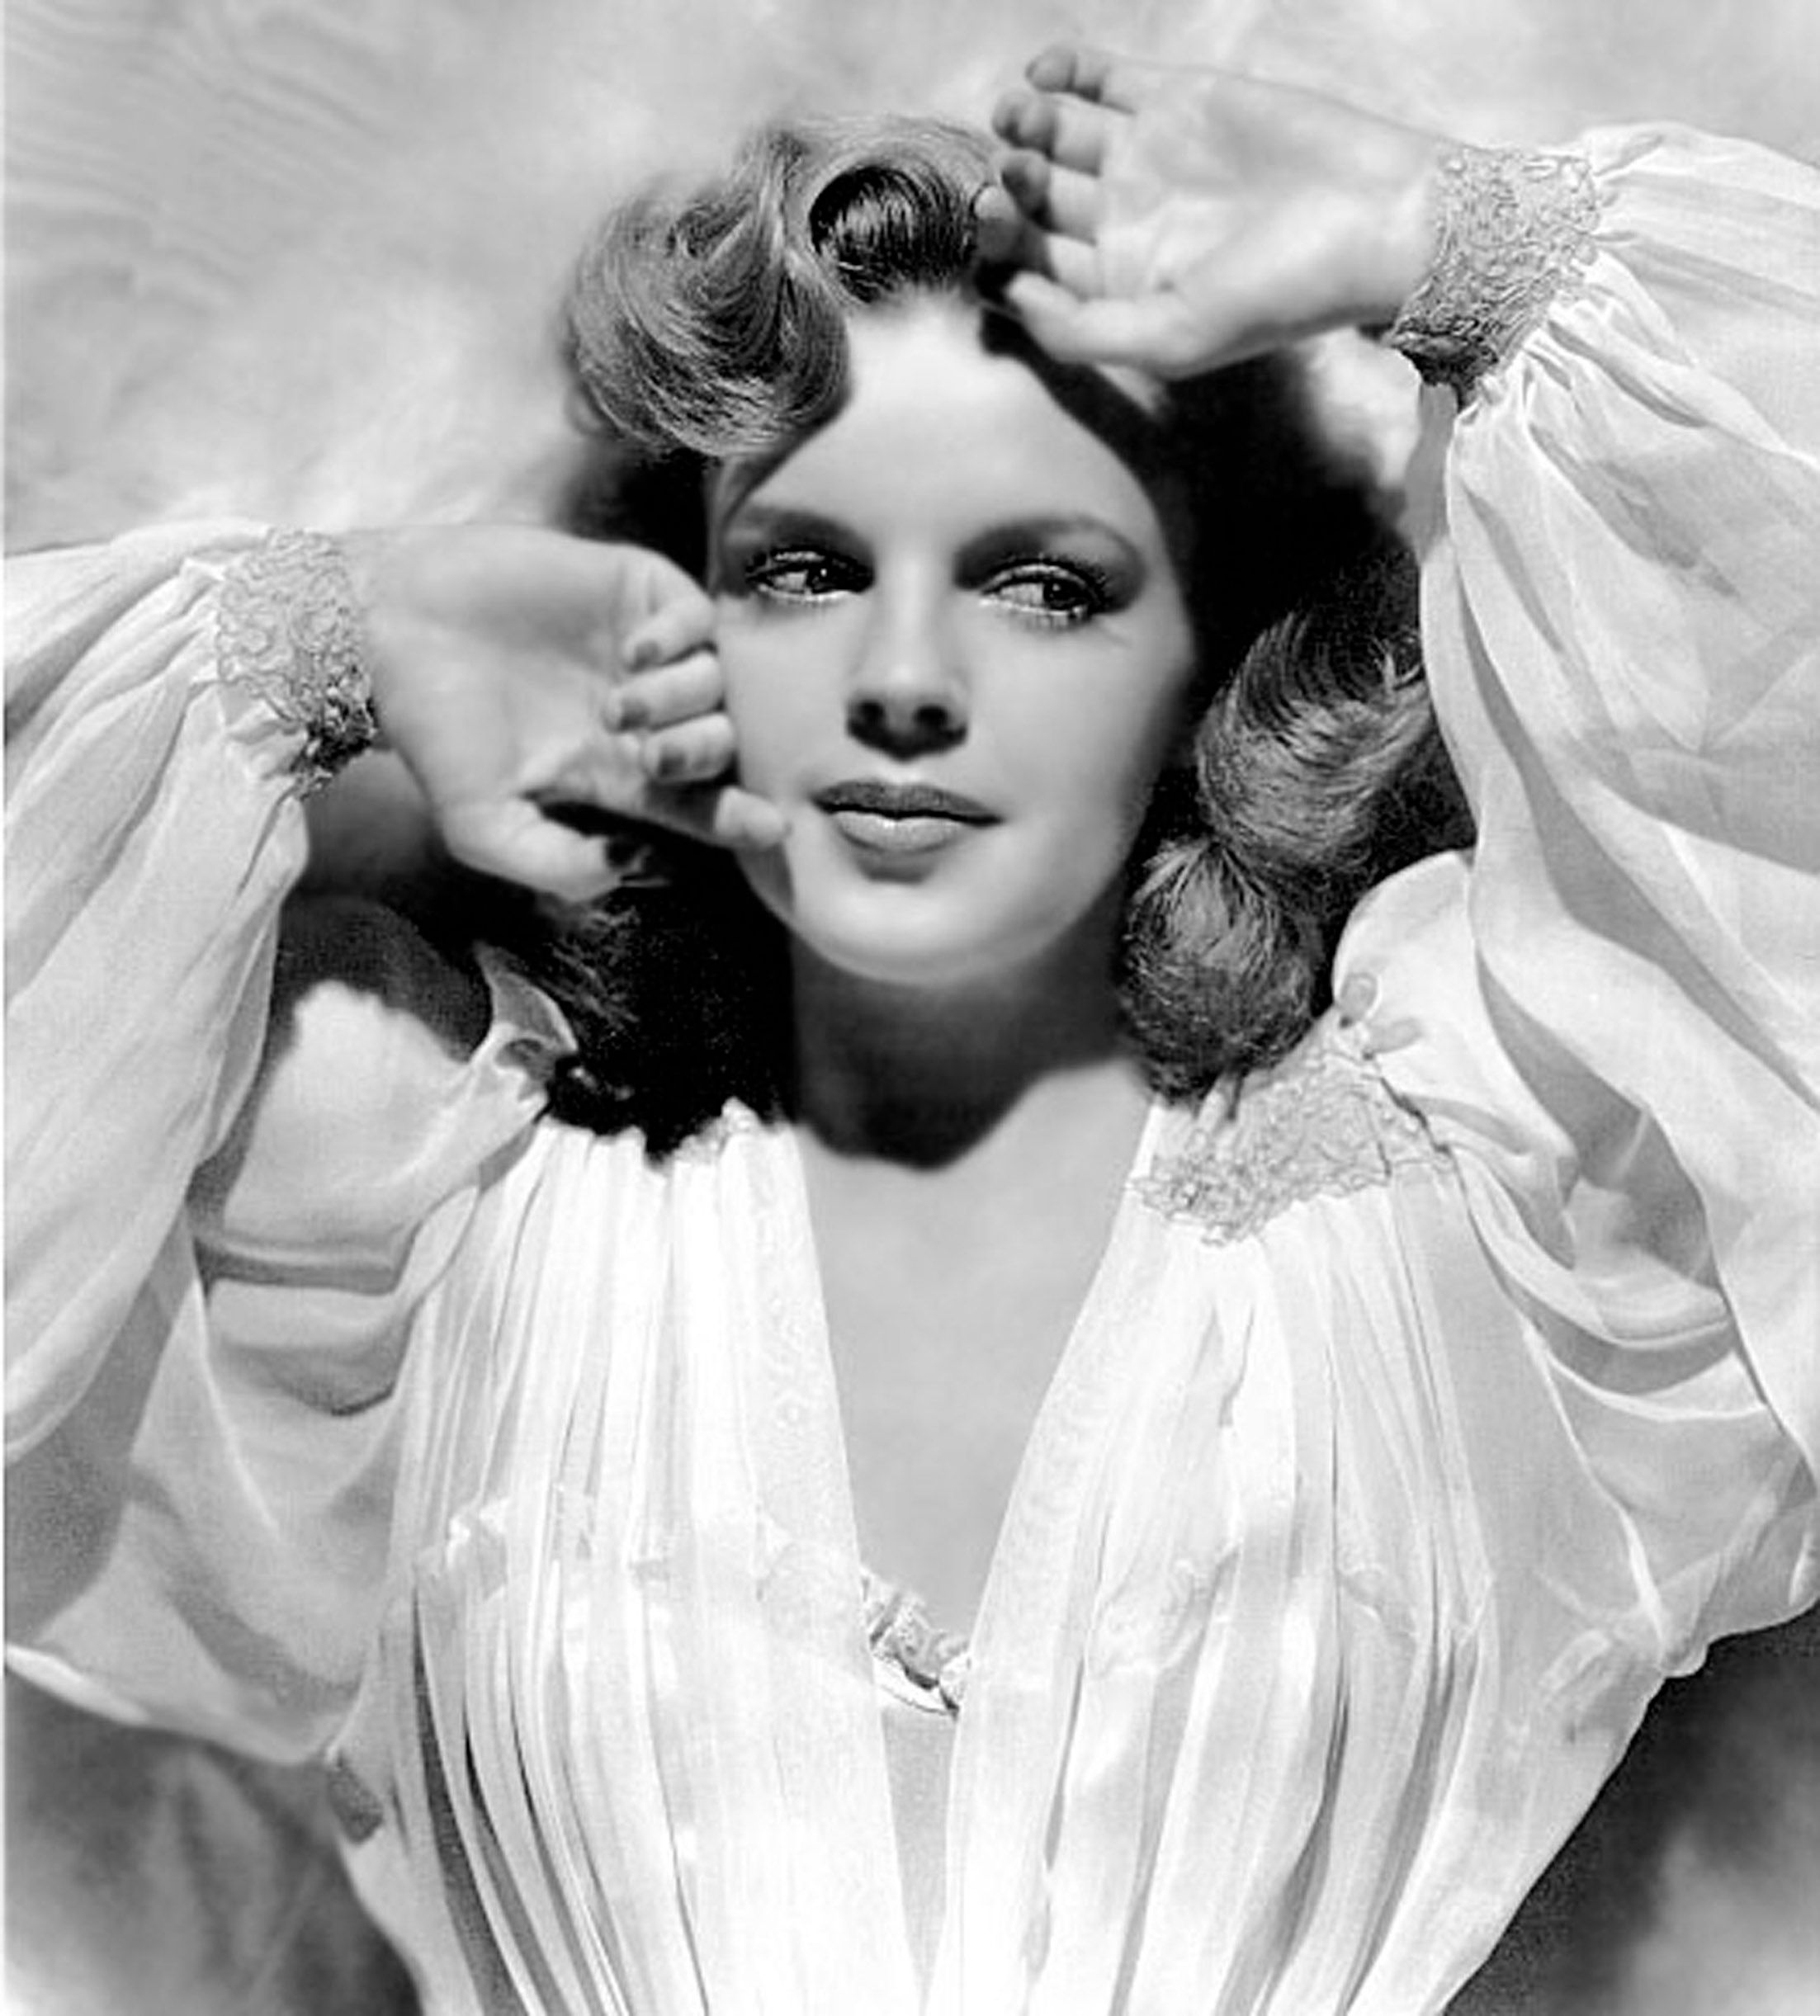 A monochrome portrait of Judy Garland, circa 1942 | Photo: Getty Images